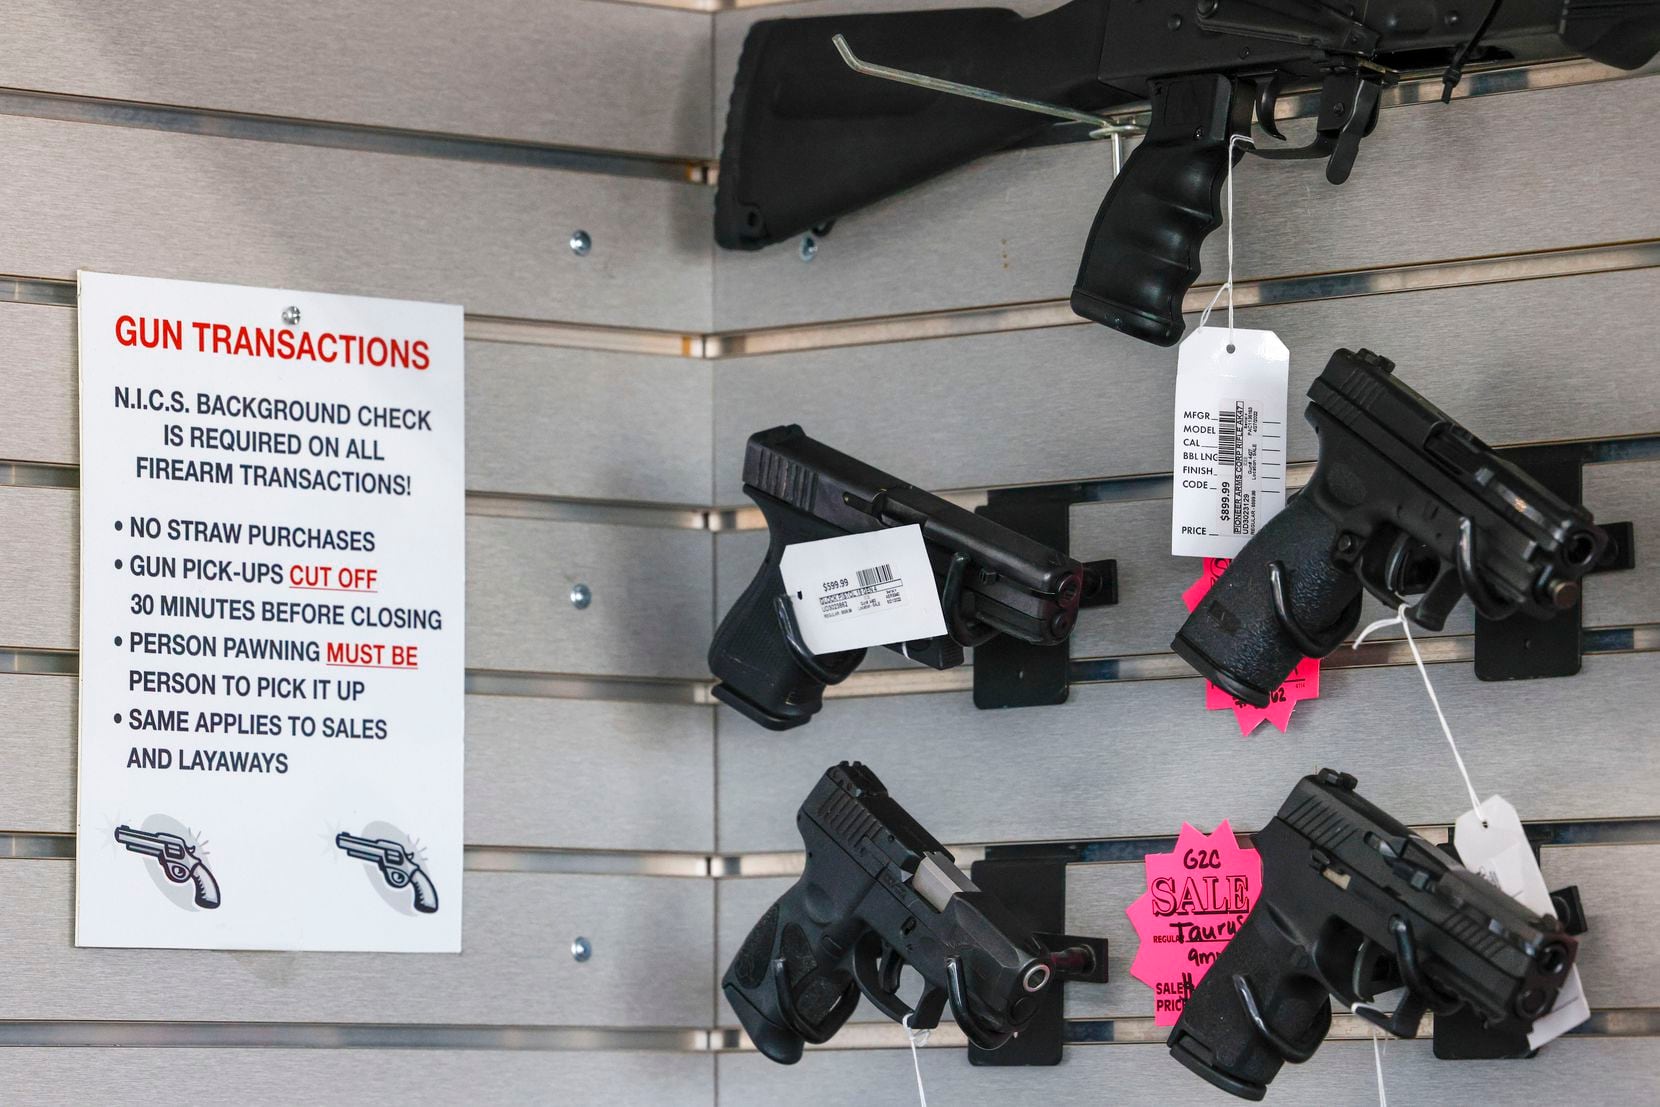 A portion of the gun inventory available for purchase in August at a local pawn shop.